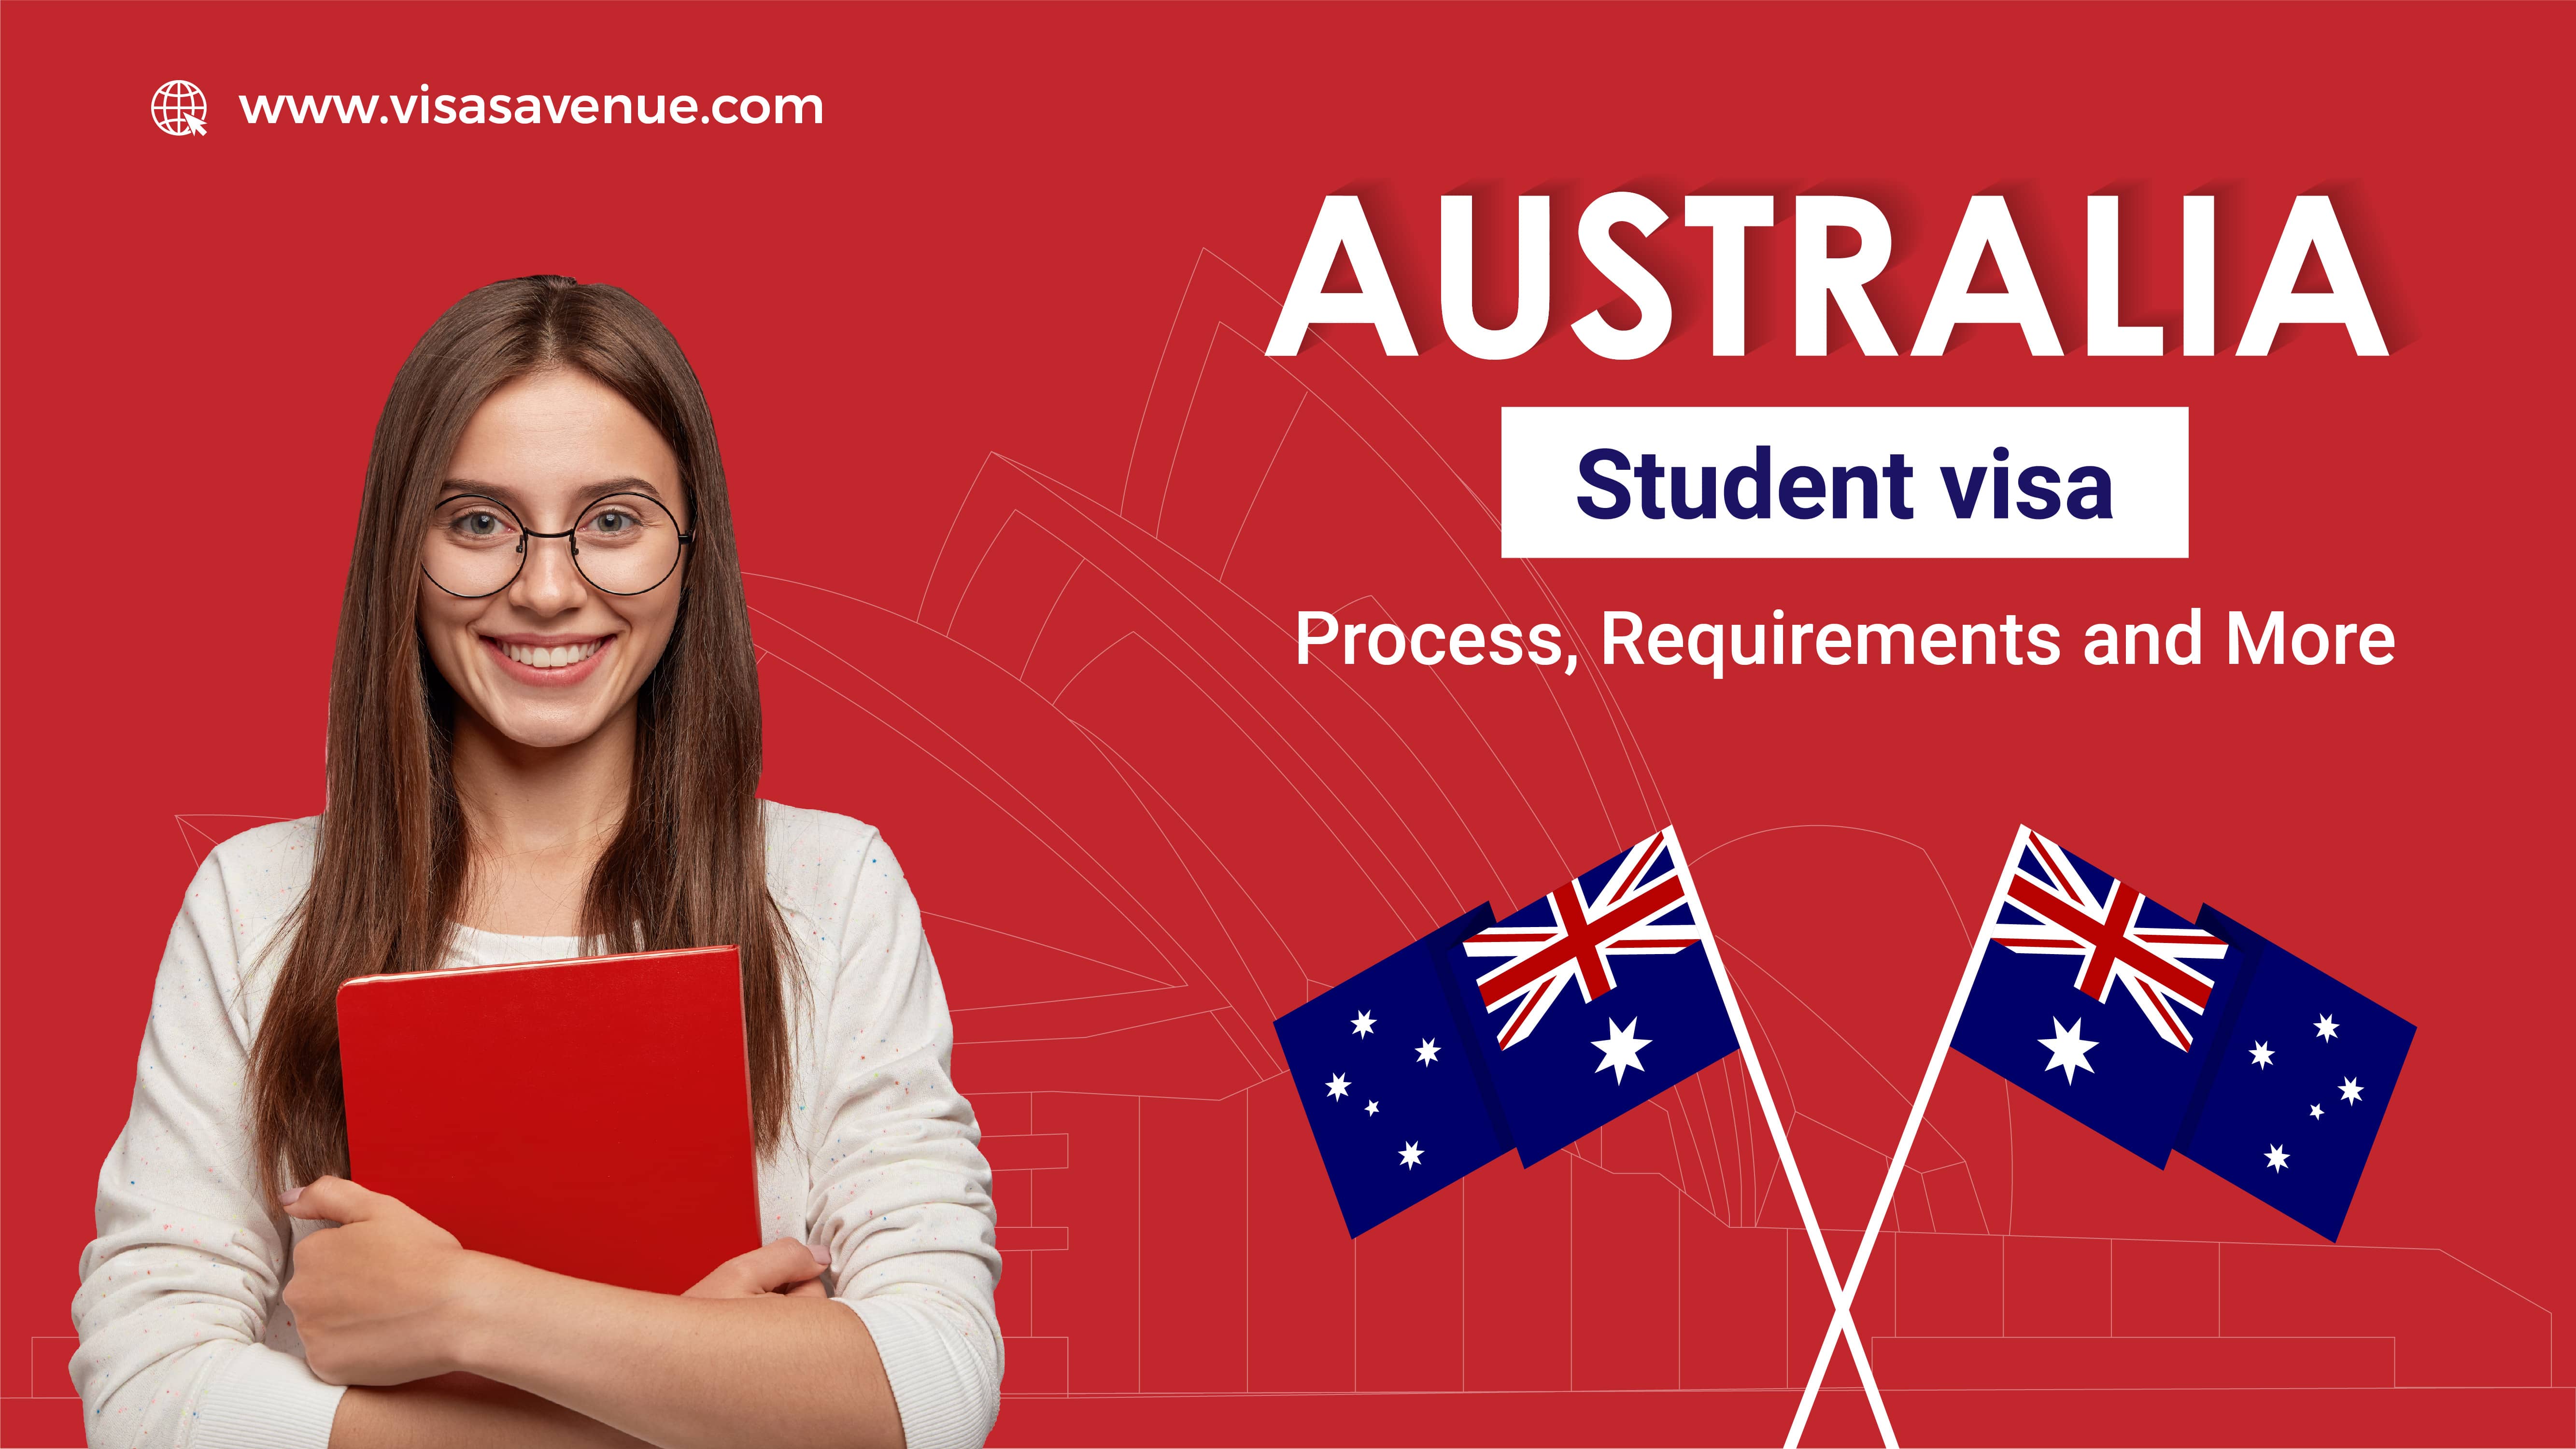 Australia Student visa- Process, Requirements and More